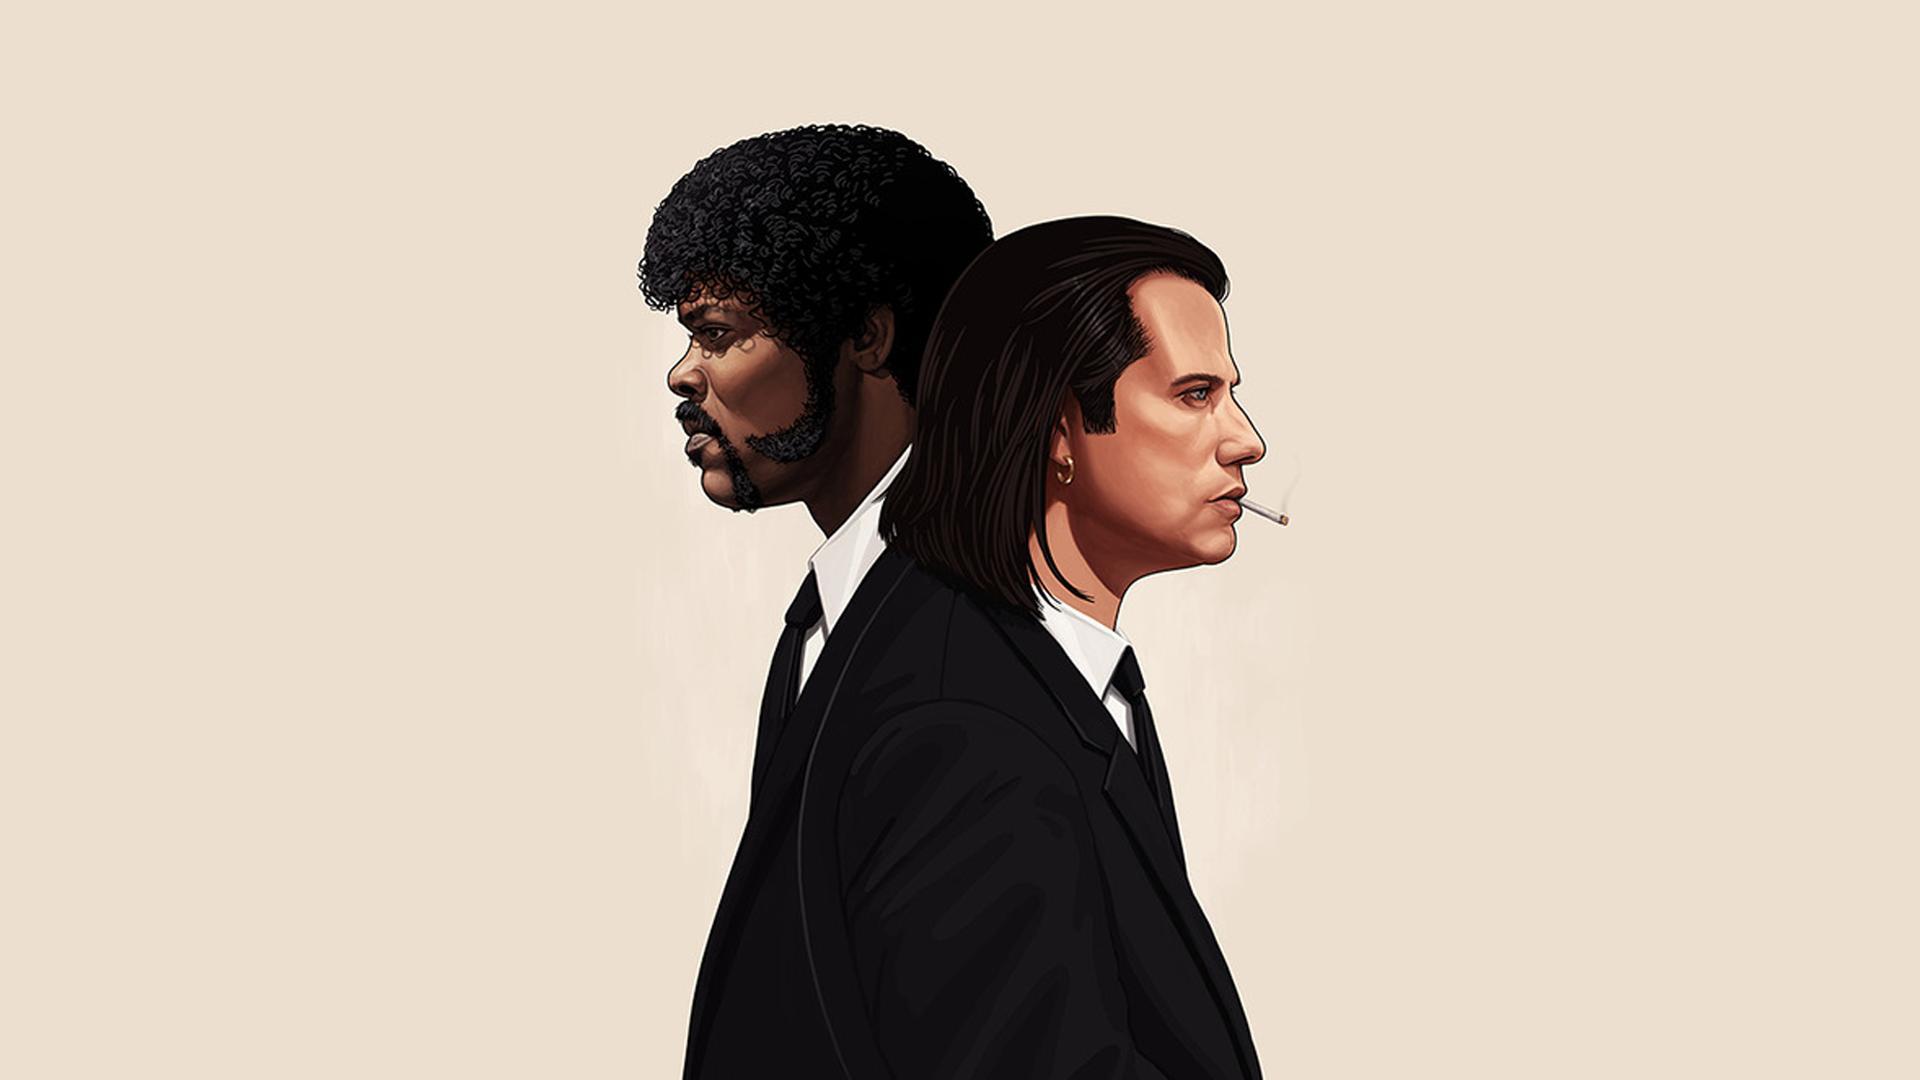 Pulp Fiction Full HD Wallpaper and Background Imagex1080